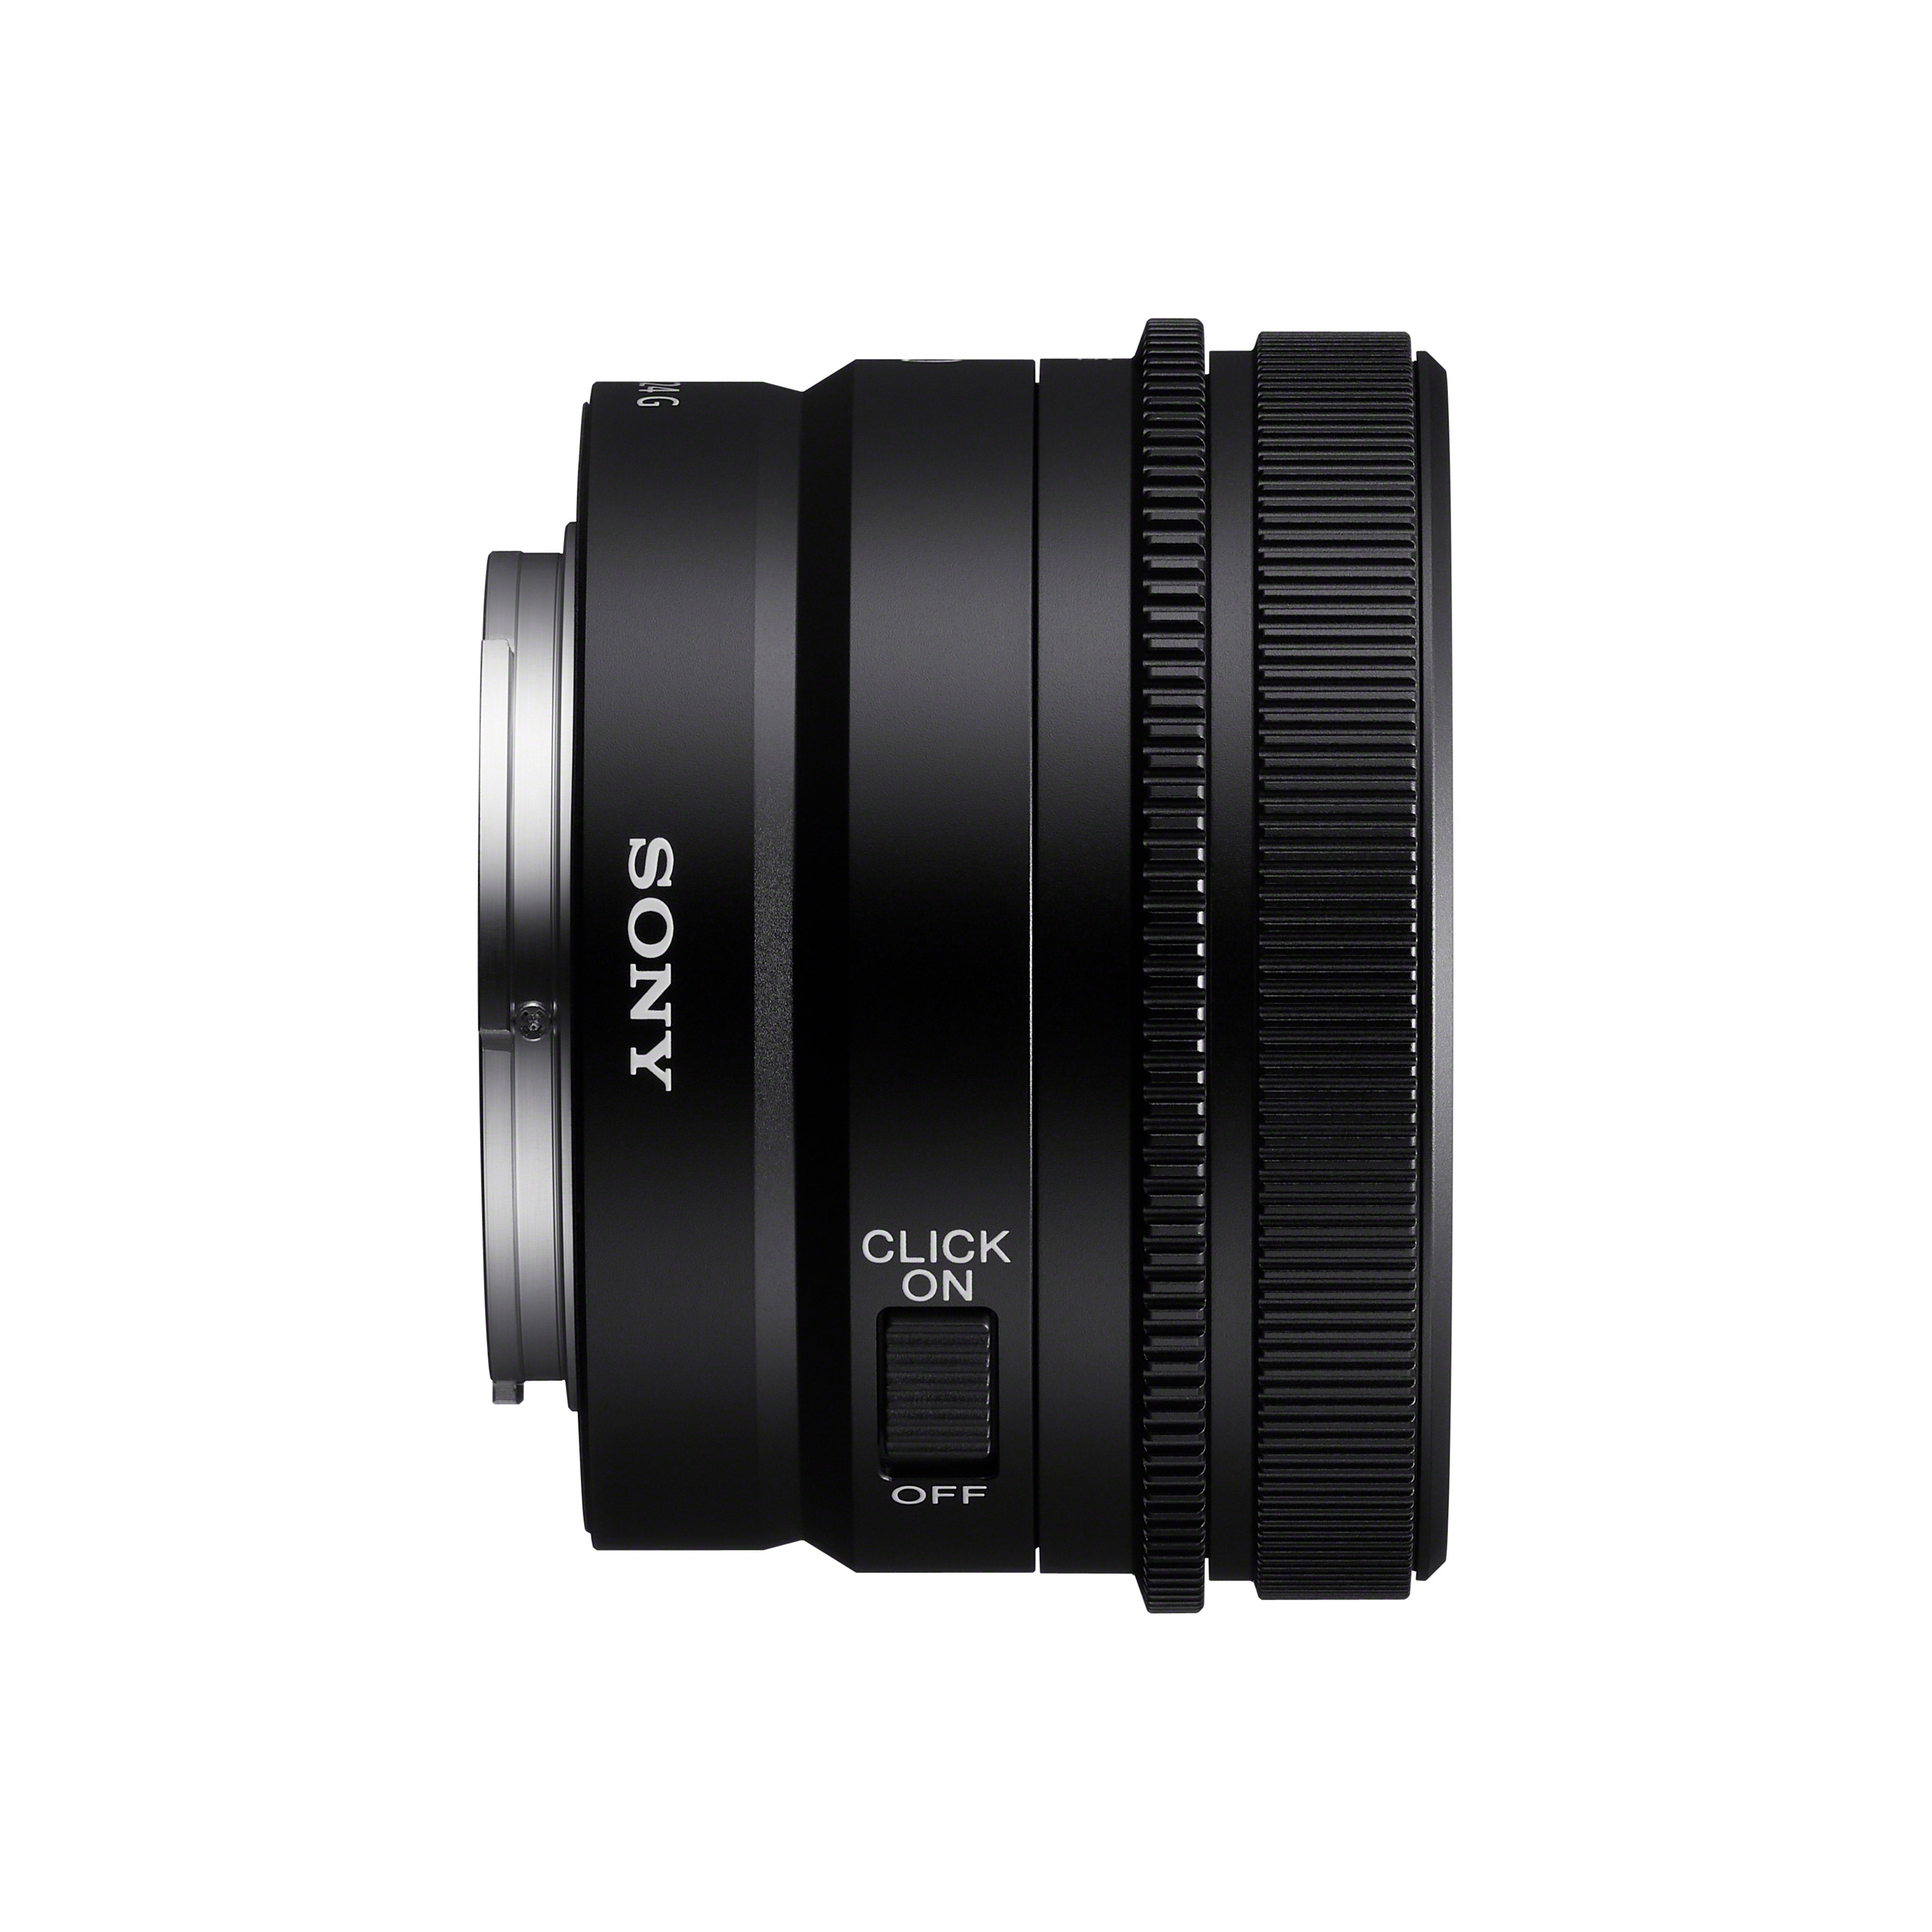 FE 24mm F2.8 G — The Sony Shop